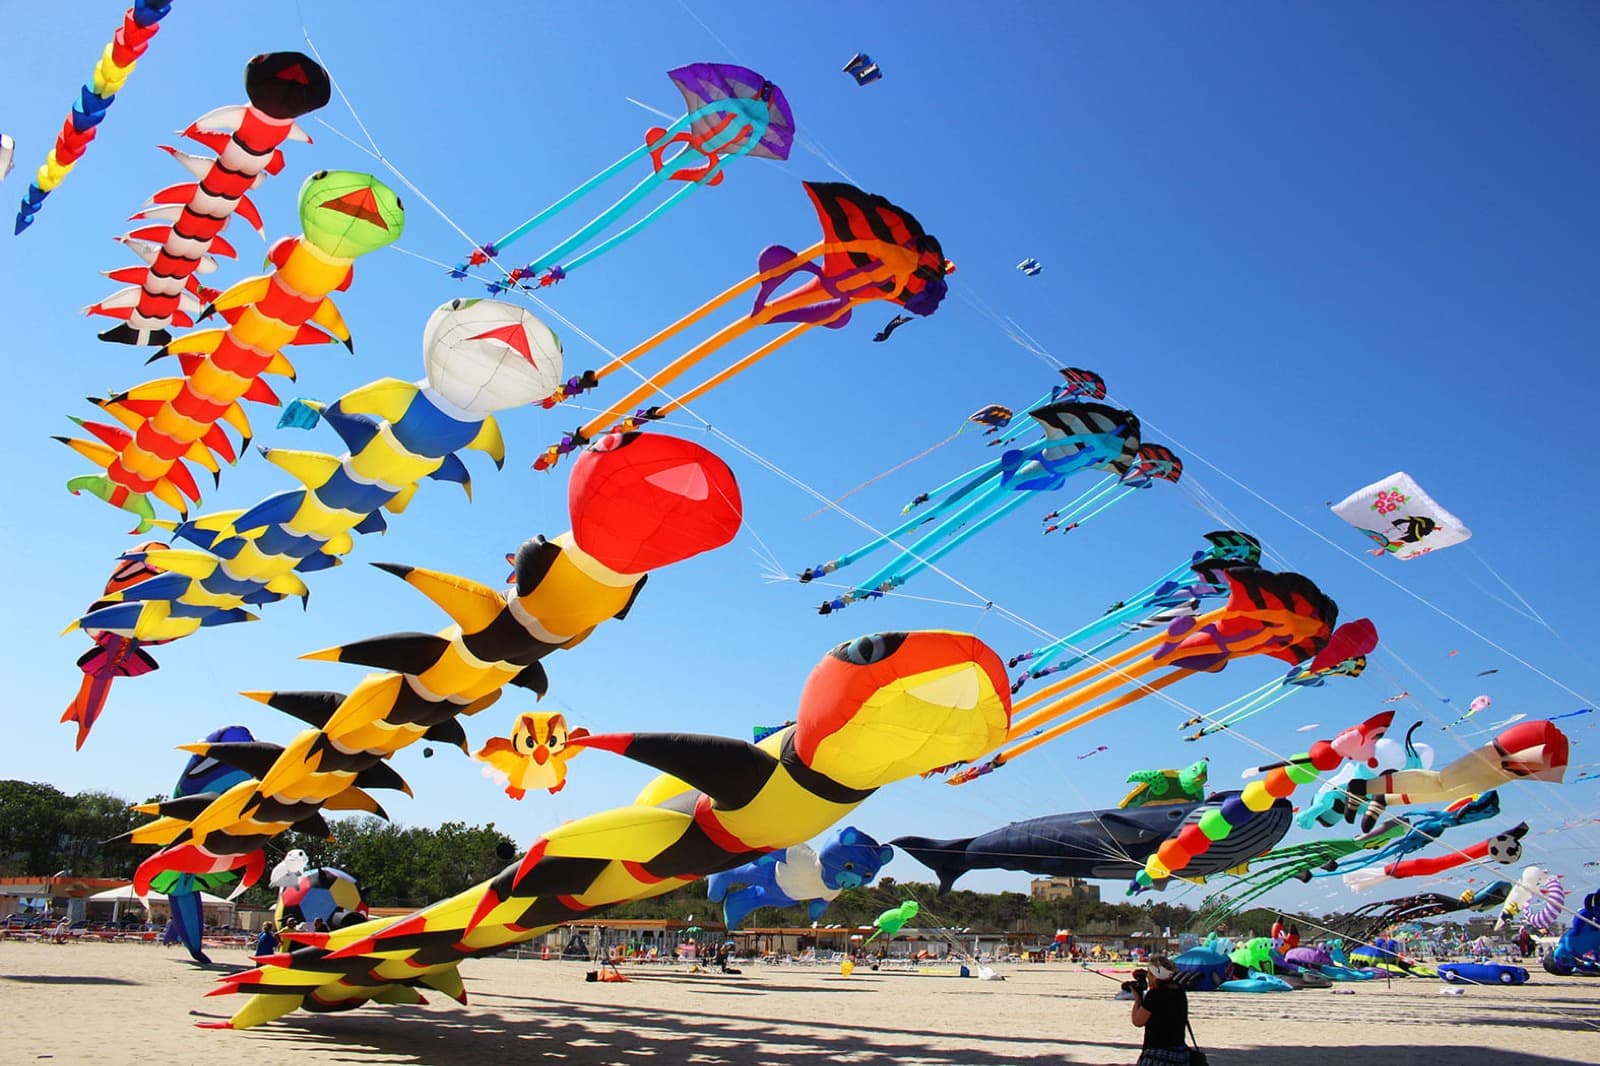 Kites and Balloons: Festivals in the skies of Emilia-Romagna